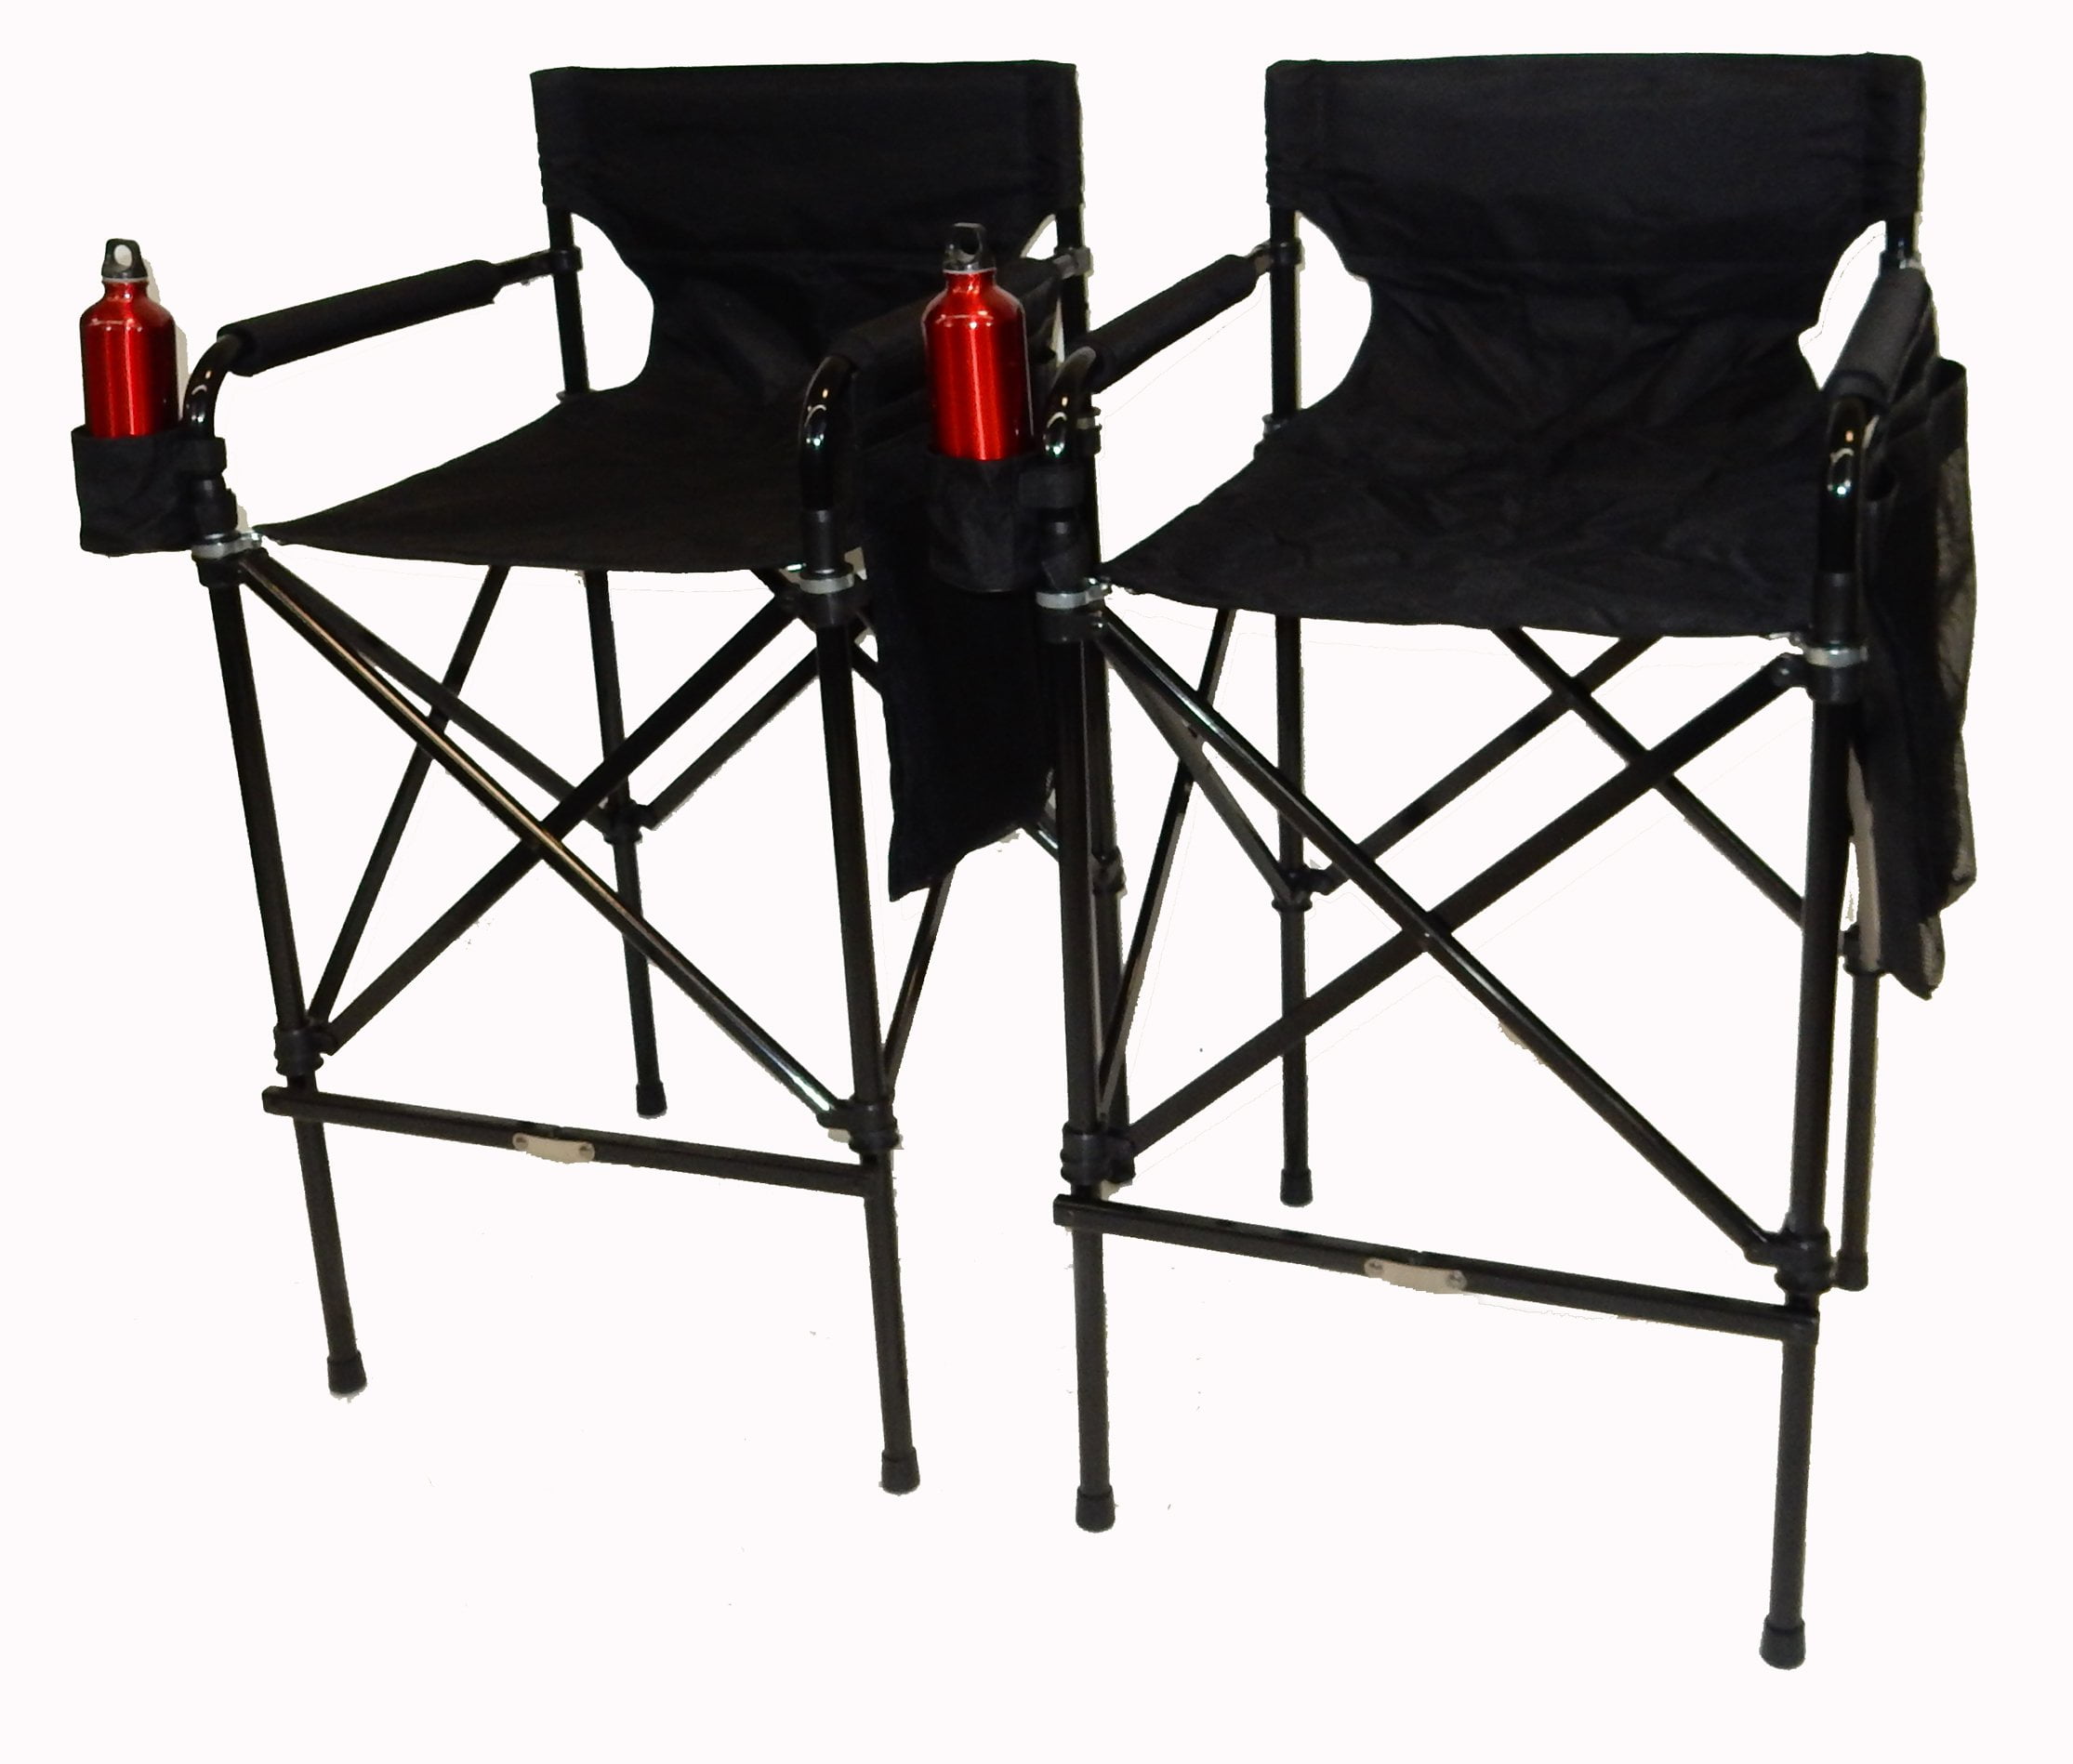 TuscanyPro Houdini Tall Director Chair - Set of 2 Quad Style, Super